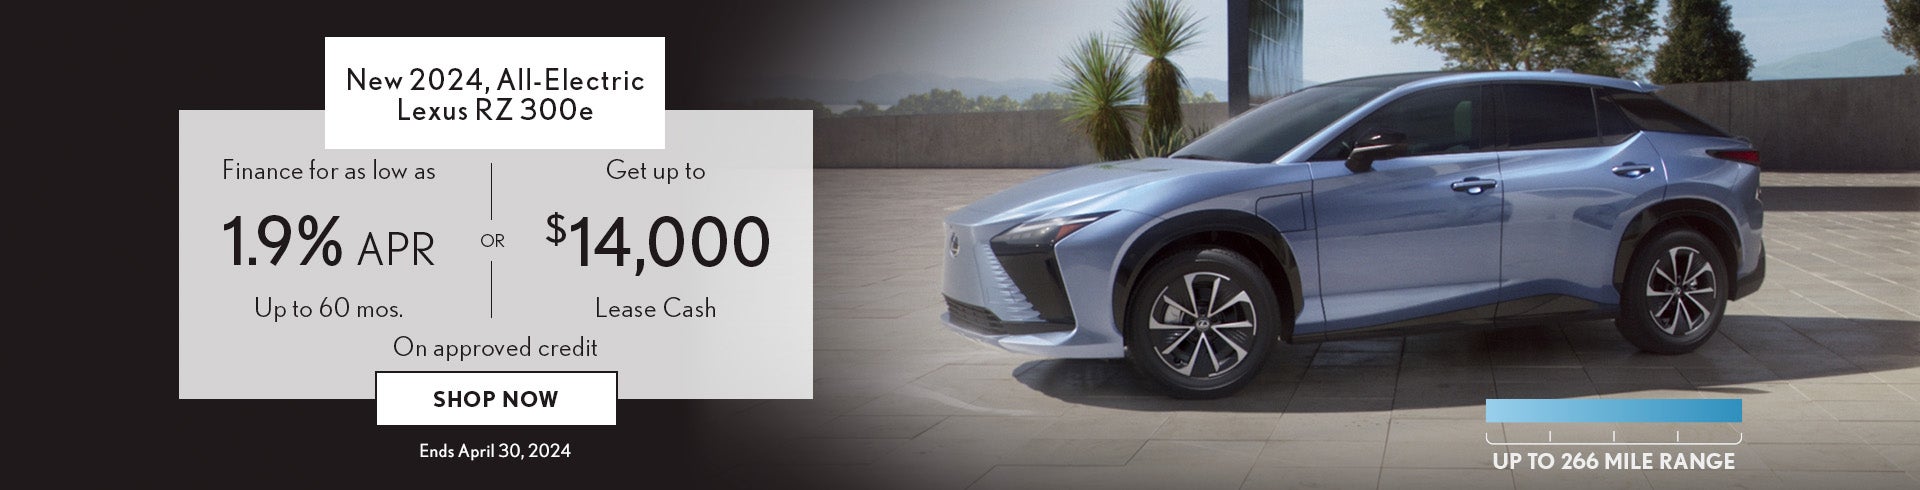 Finance or Lease a new All-Electric 2024 Lexus RZ 300e